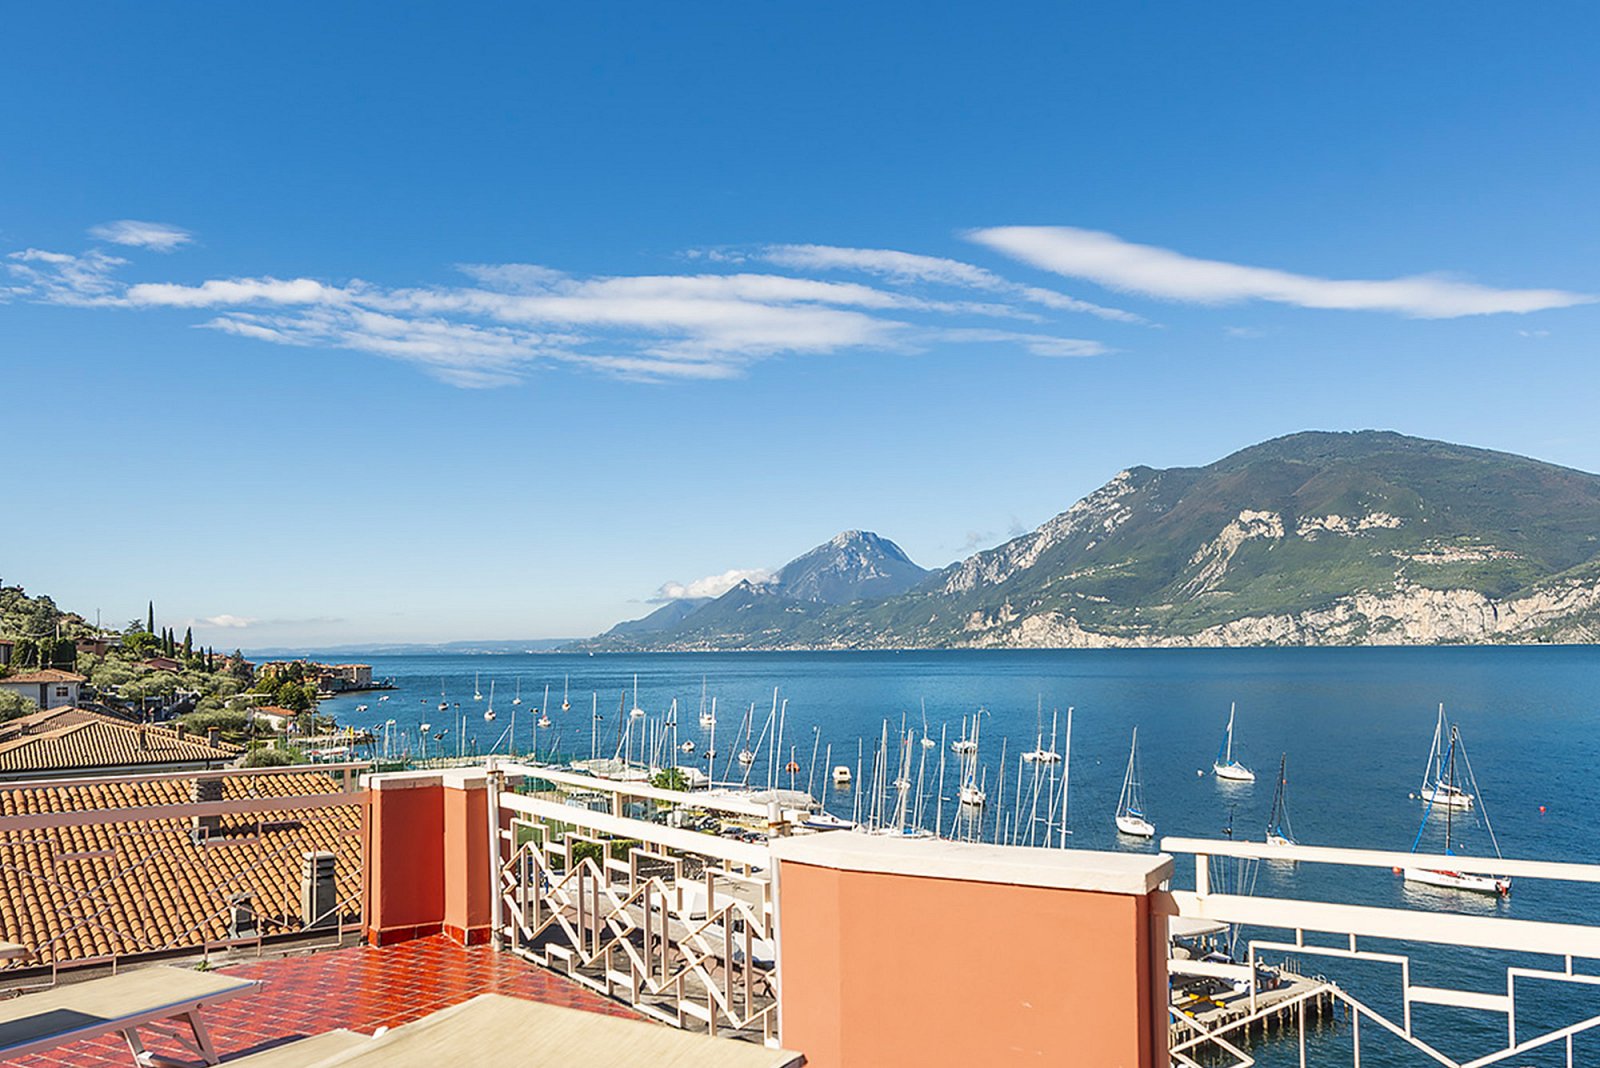 View from the 3 star hotel Firenze in Lake Garda